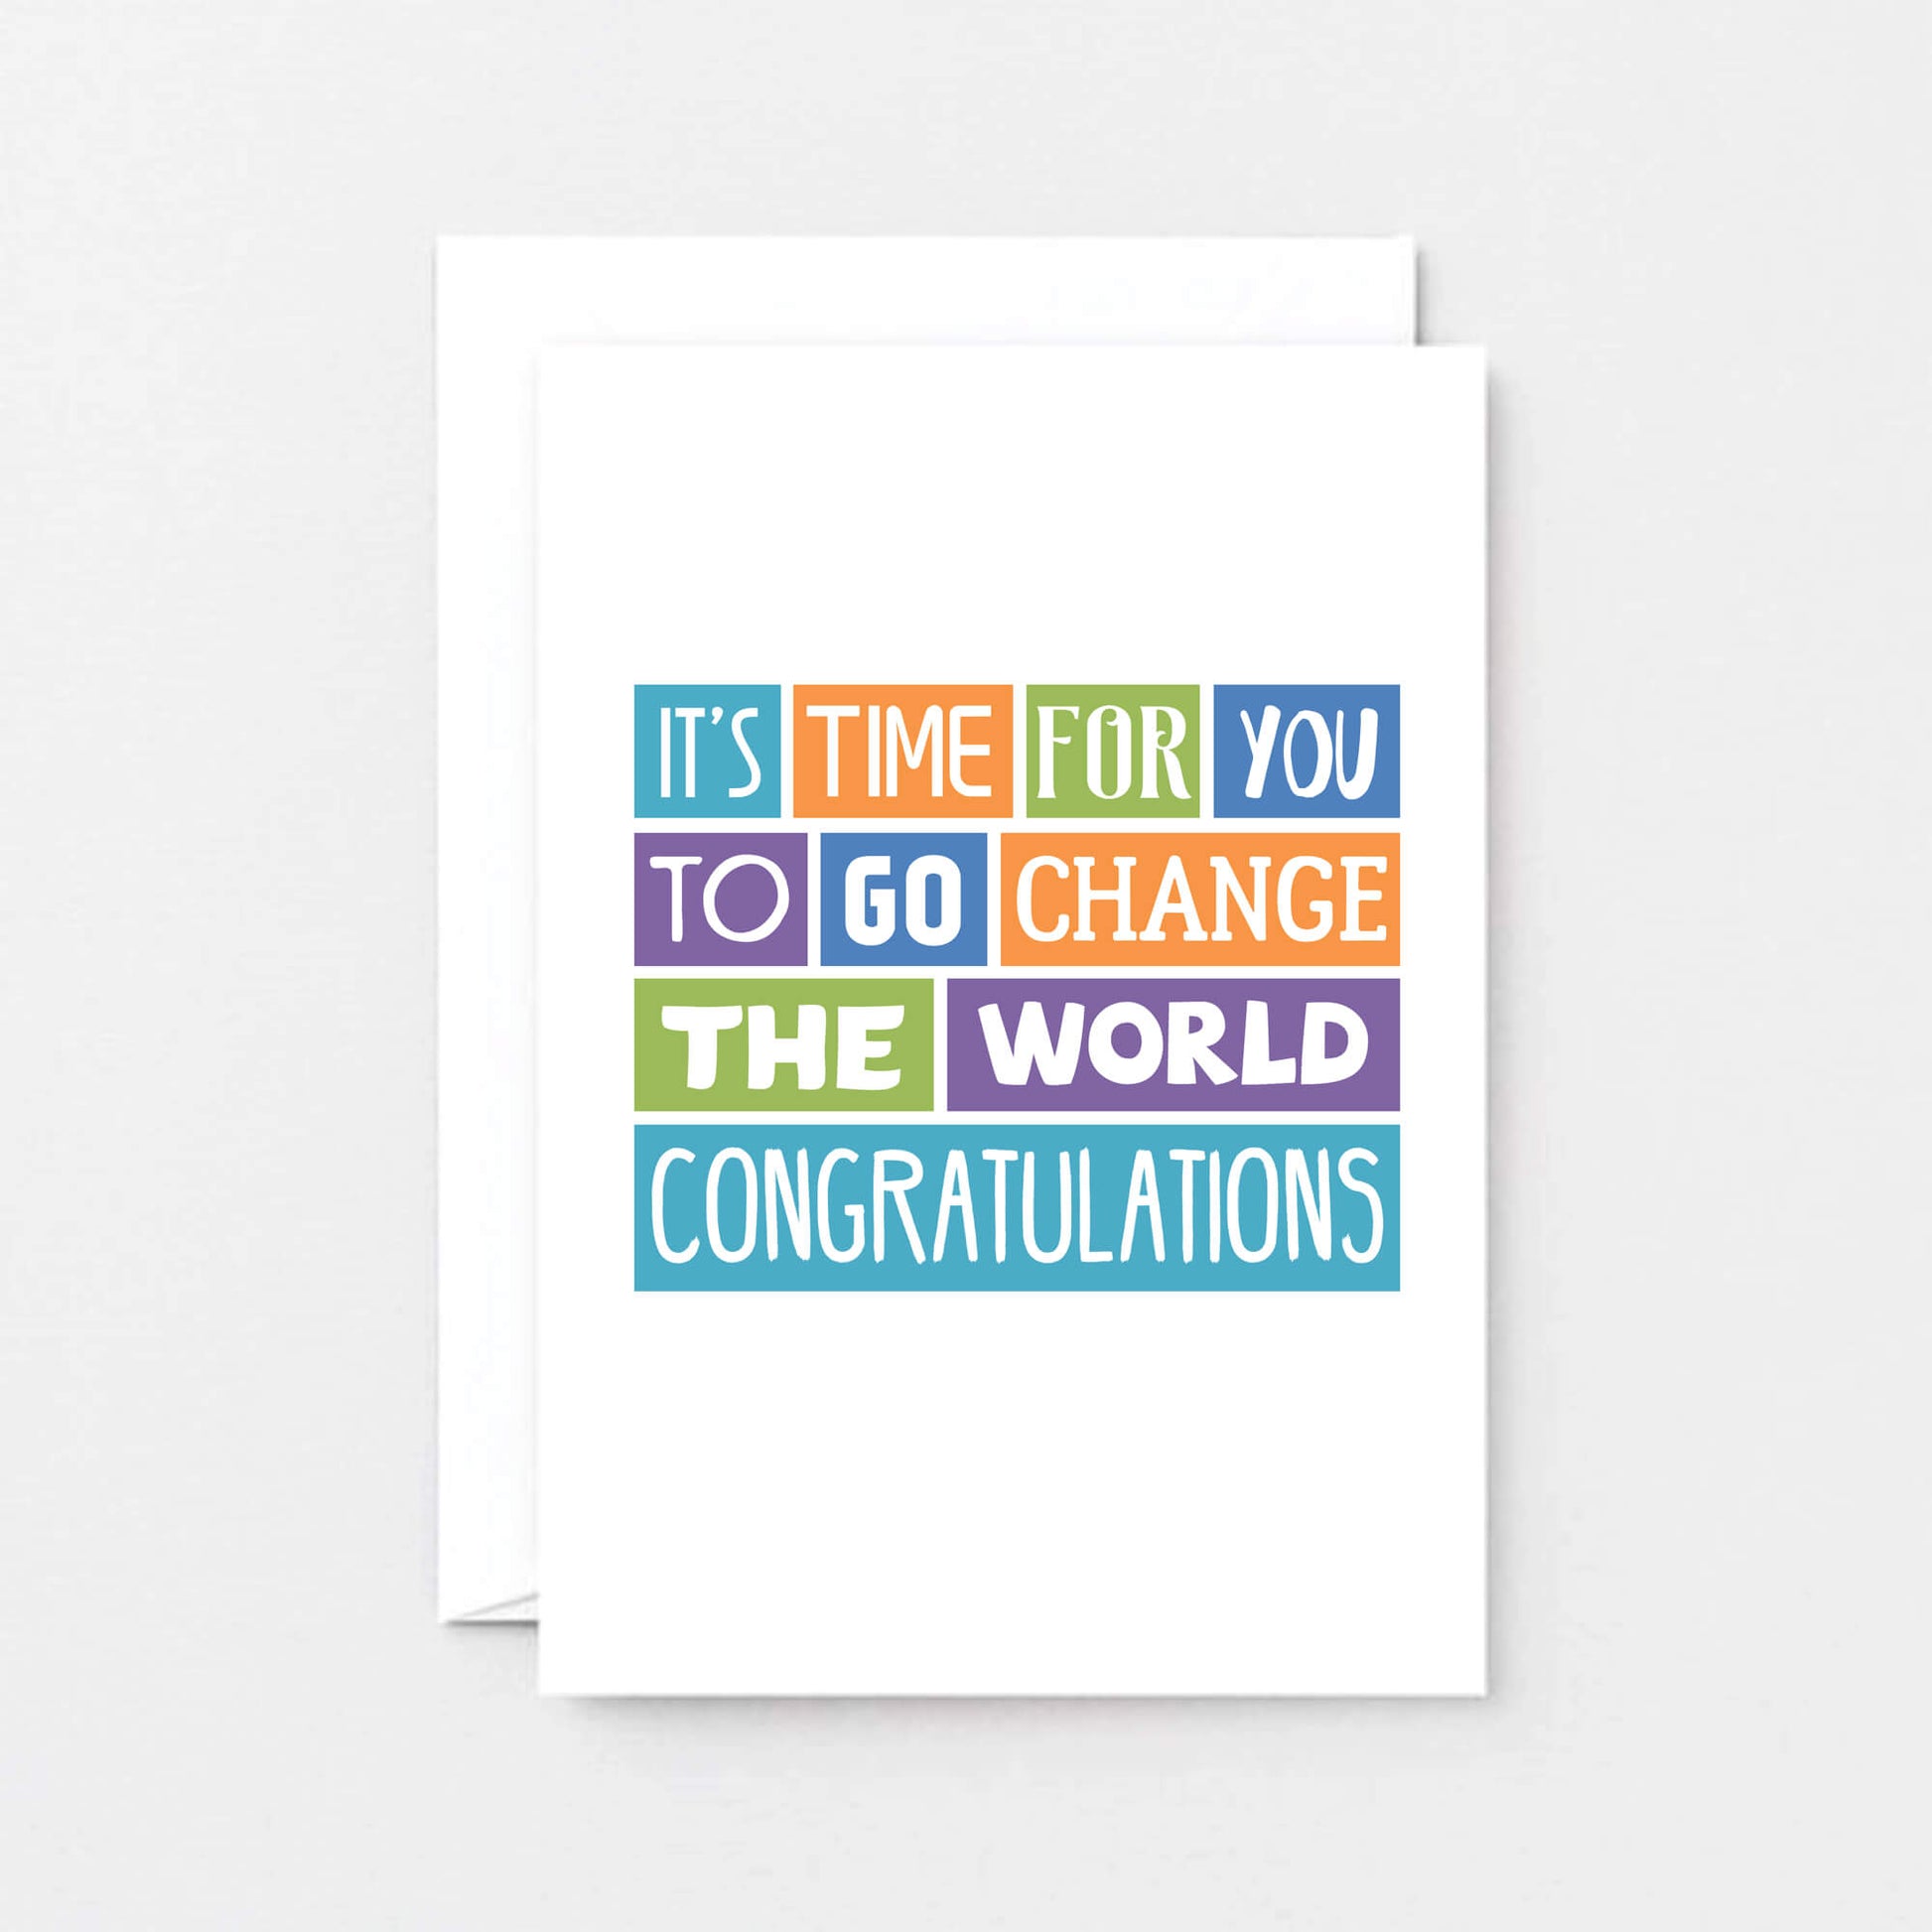 Graduate Congratulations Card by SixElevenCreations. Reads It's time for you to go change the world. Congratulations. Product Code SE0022A6